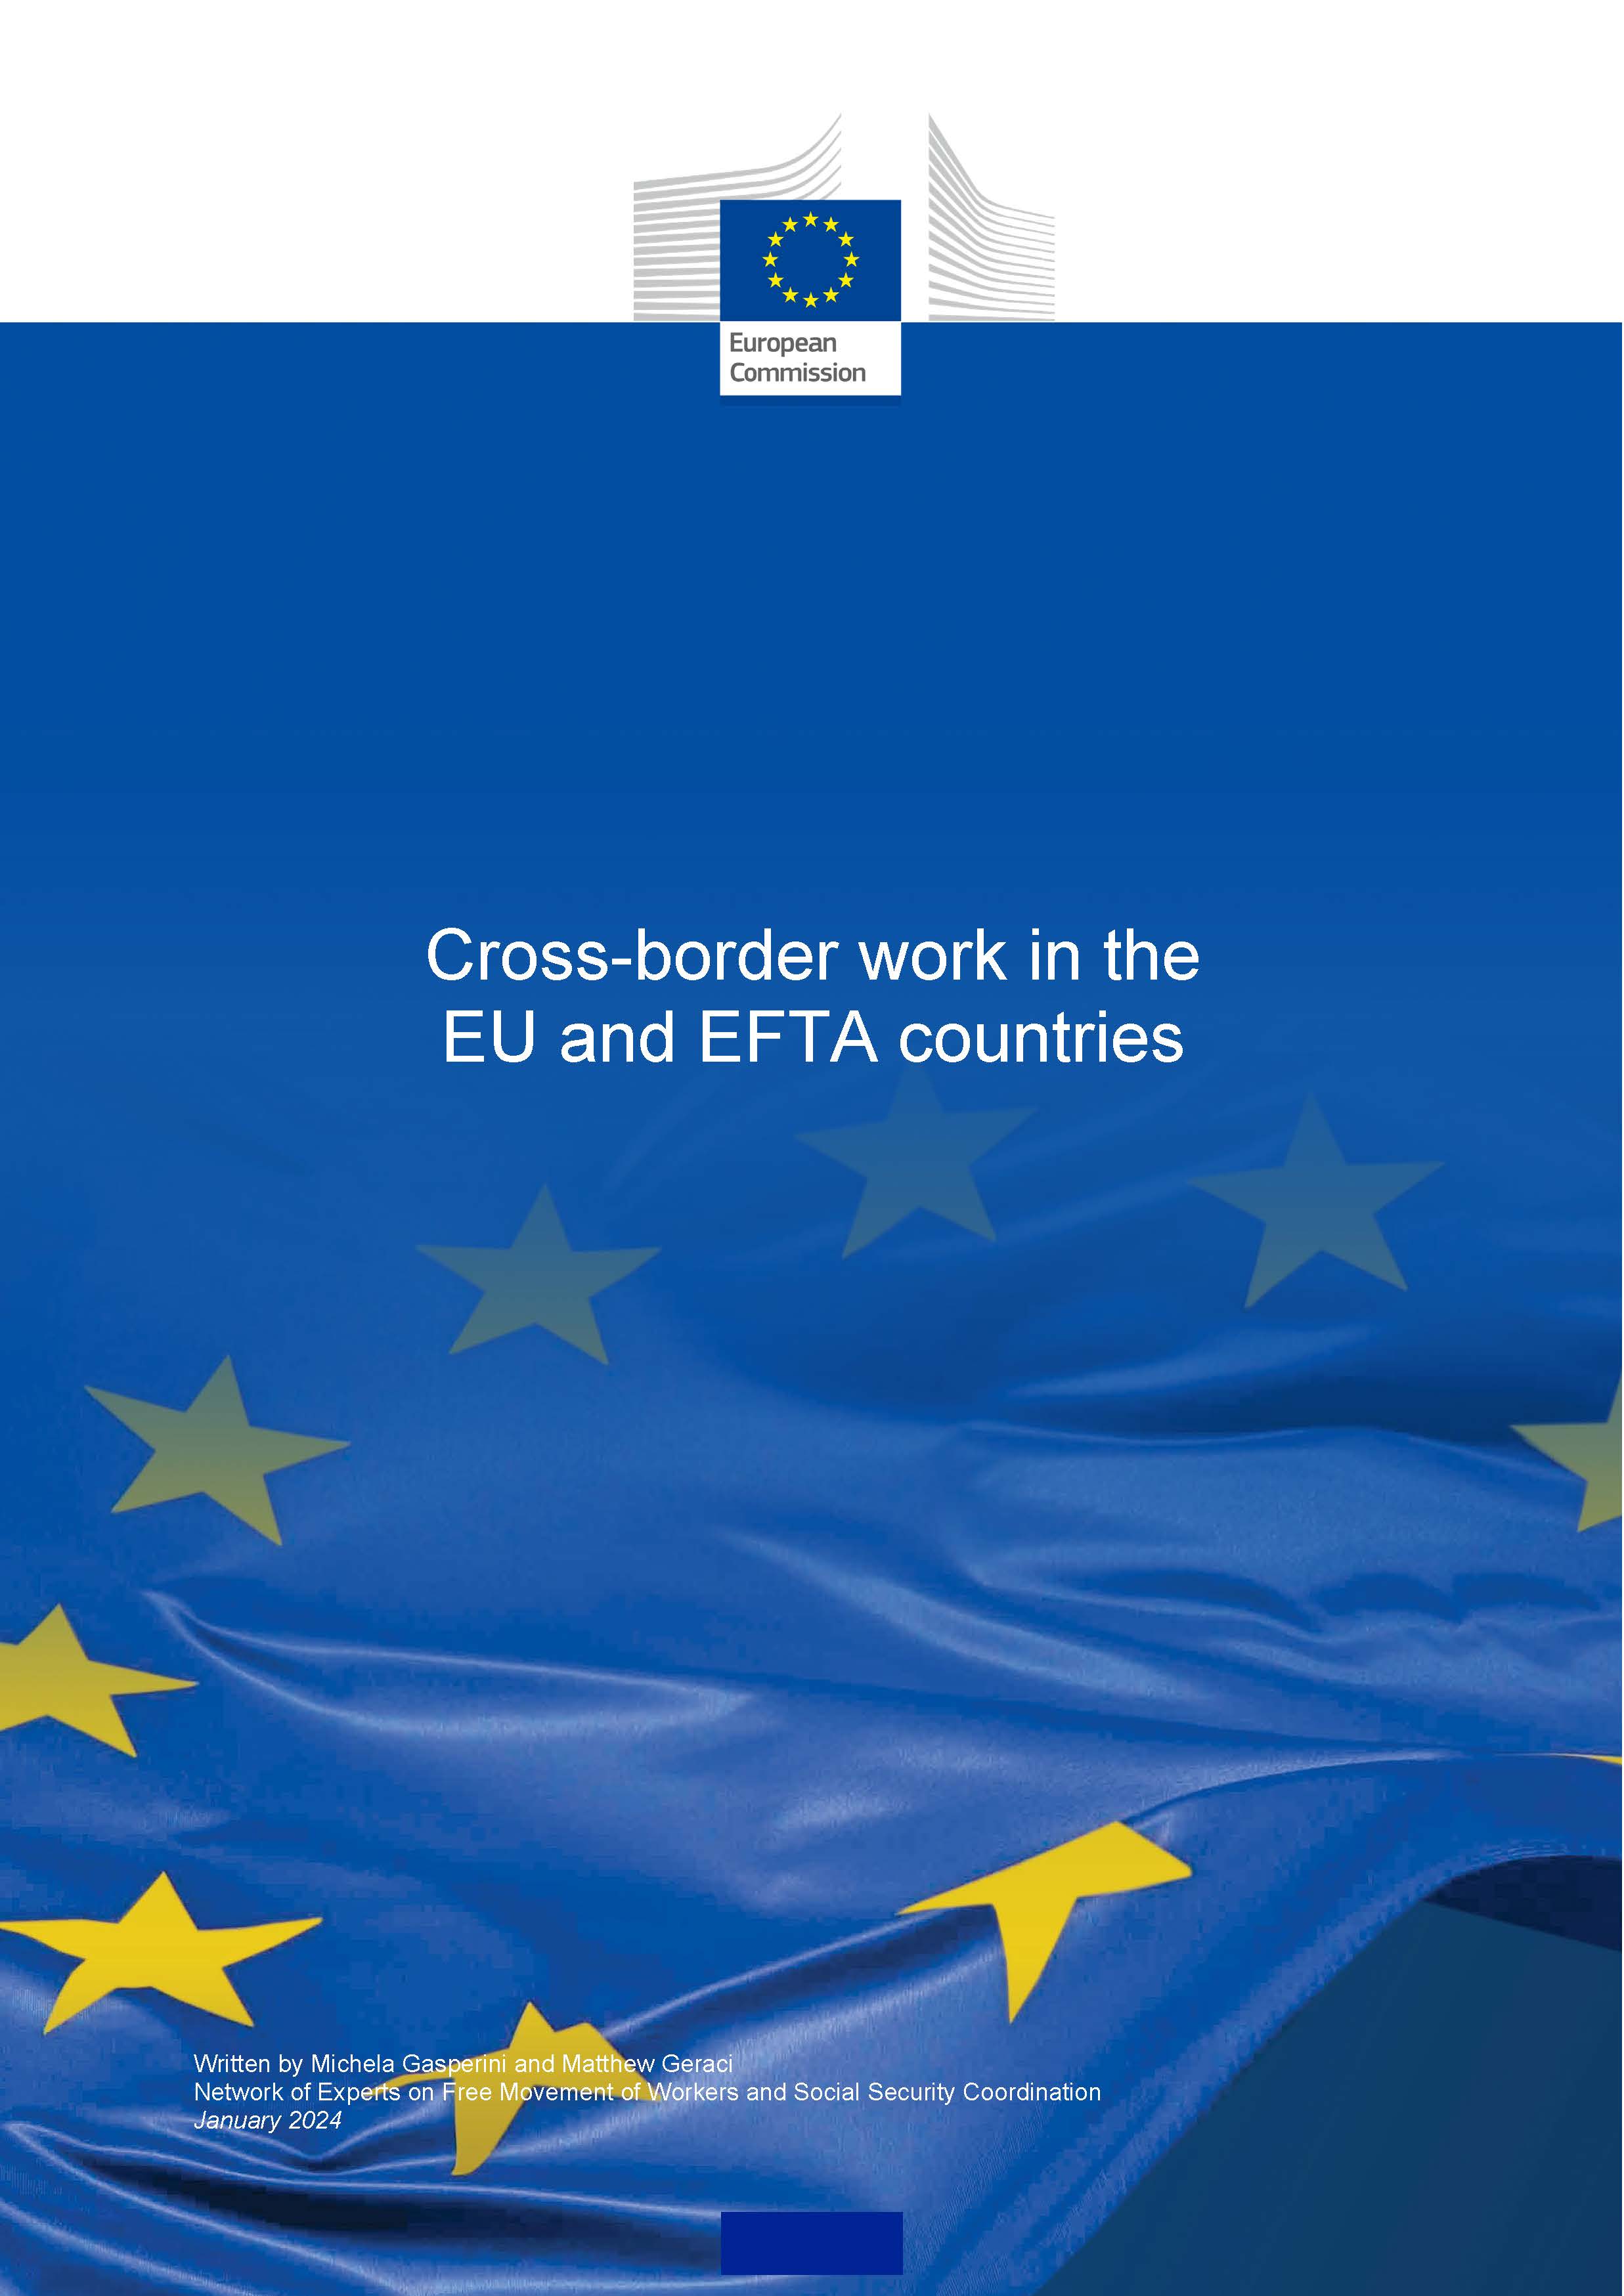 Cross-border work in the EU and EFTA countries